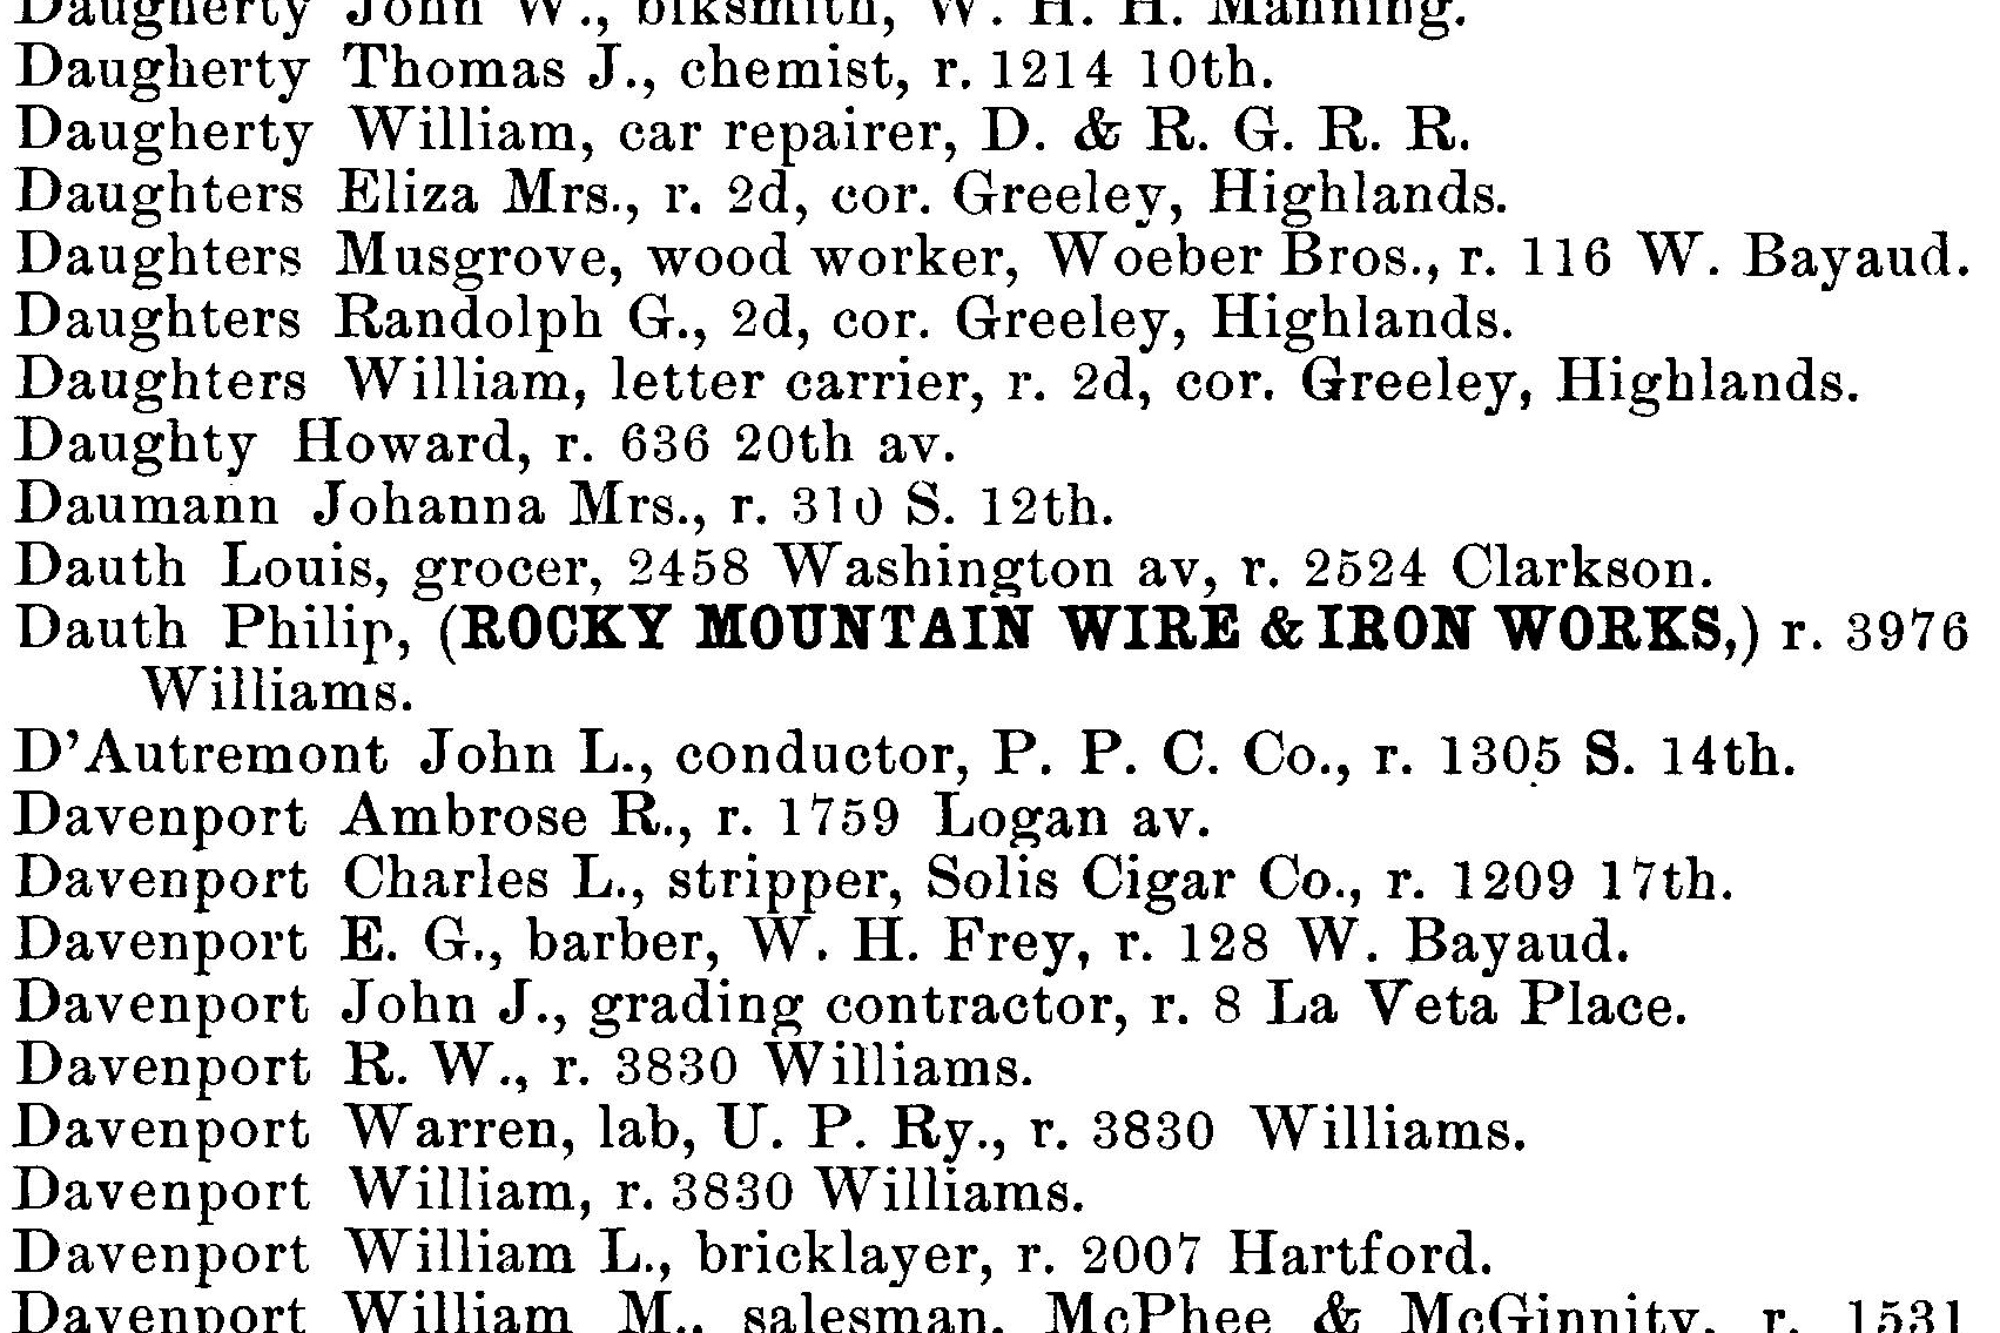 Dauth Family Archive - 1891 - Denver Directory - Entry for Louis and Philip Dauth